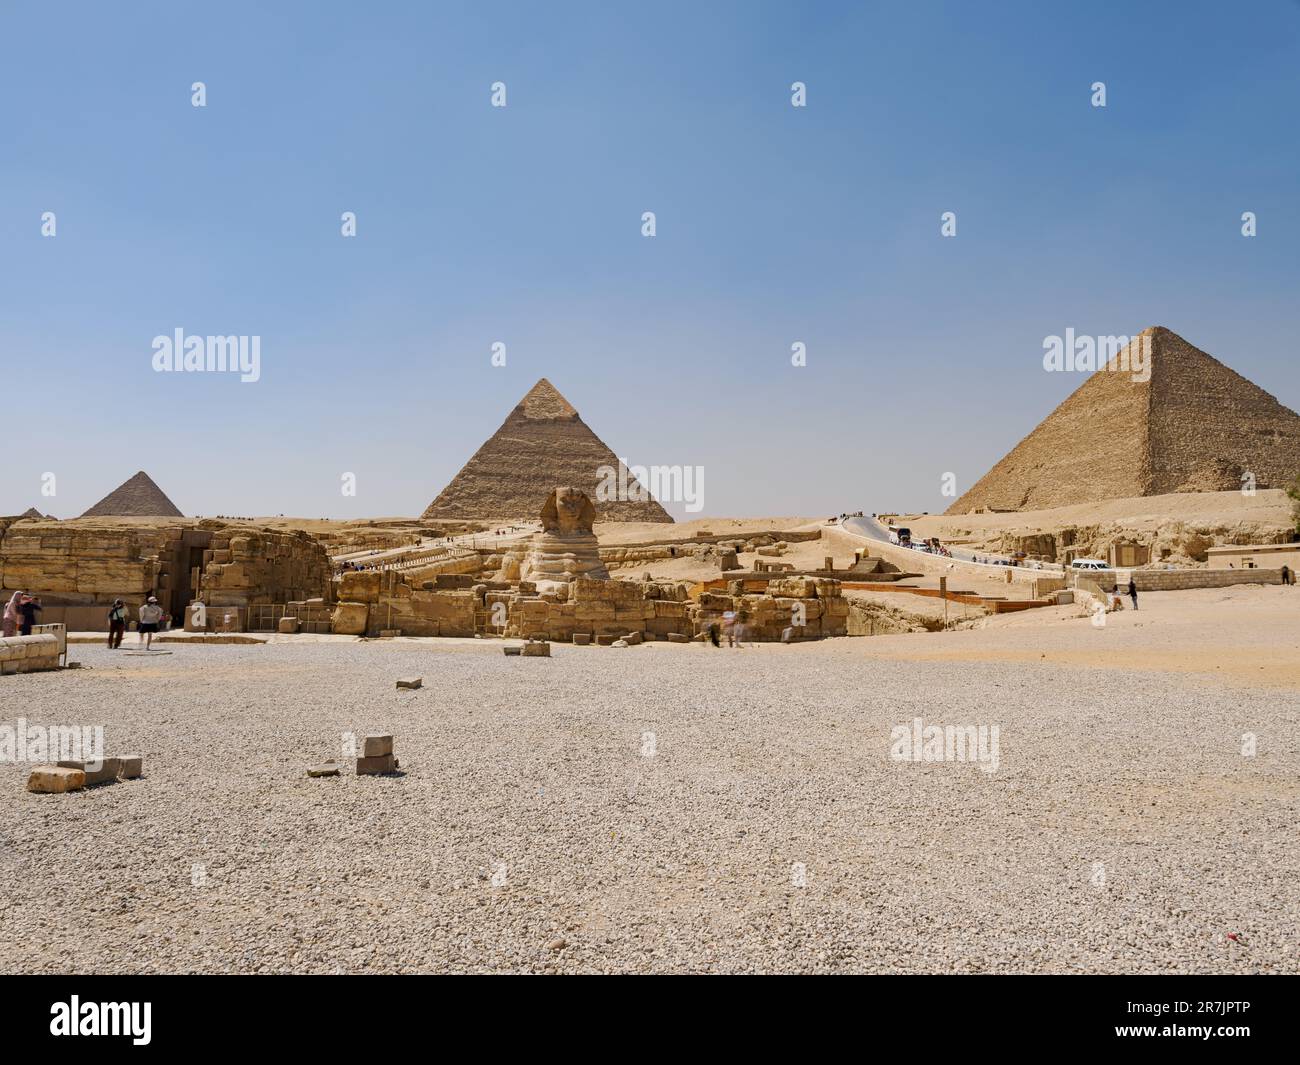 Pyramids of Gizeh: Ancient Architectural Wonders in Egypts Arid Stock Photo